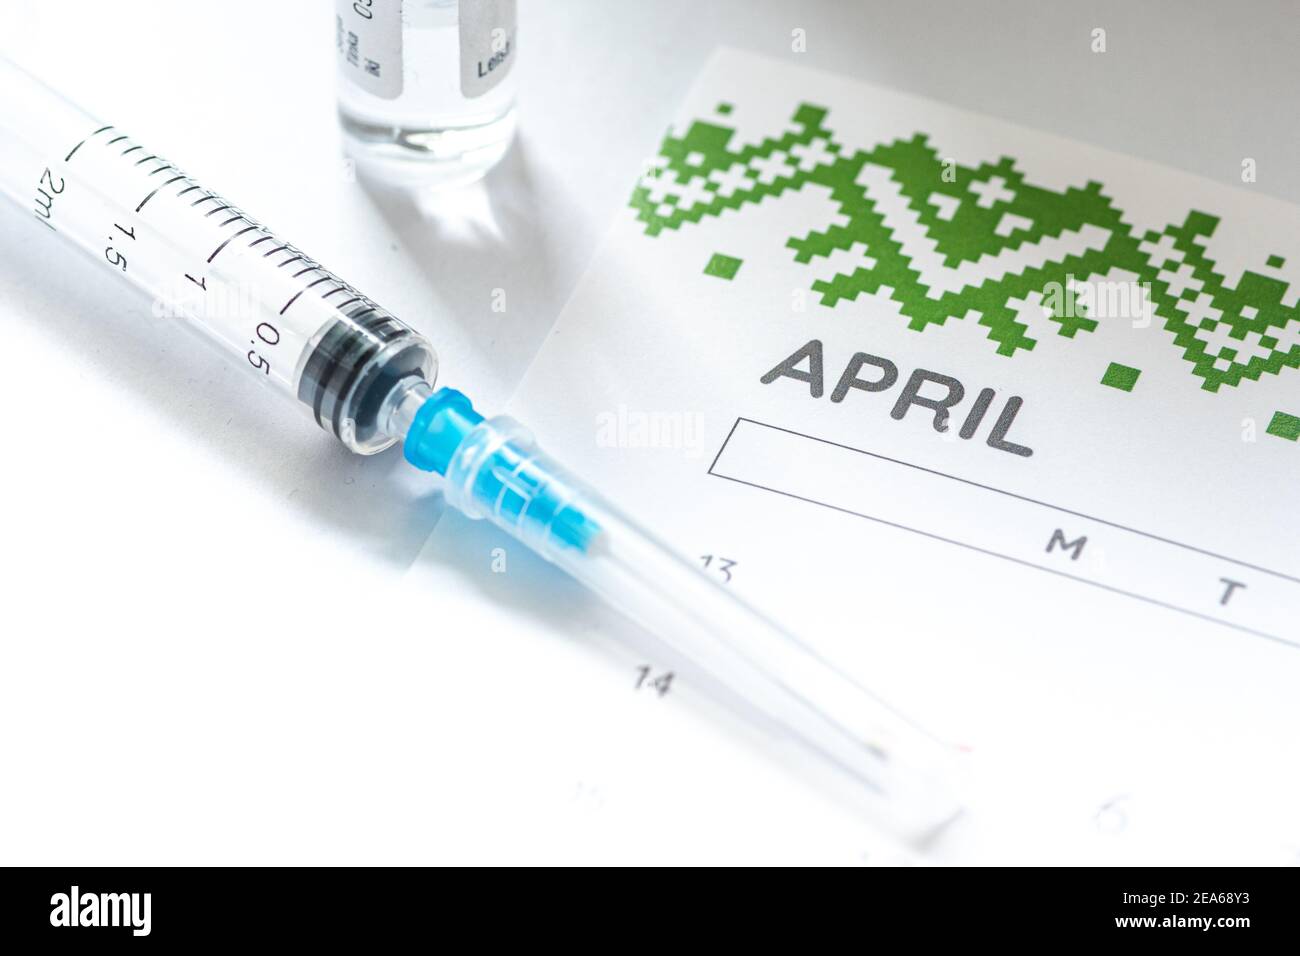 Syringe, glass vial or phial and calendar with month of April on a white table ready to be used. Covid or Coronavirus vaccine background, close up Stock Photo